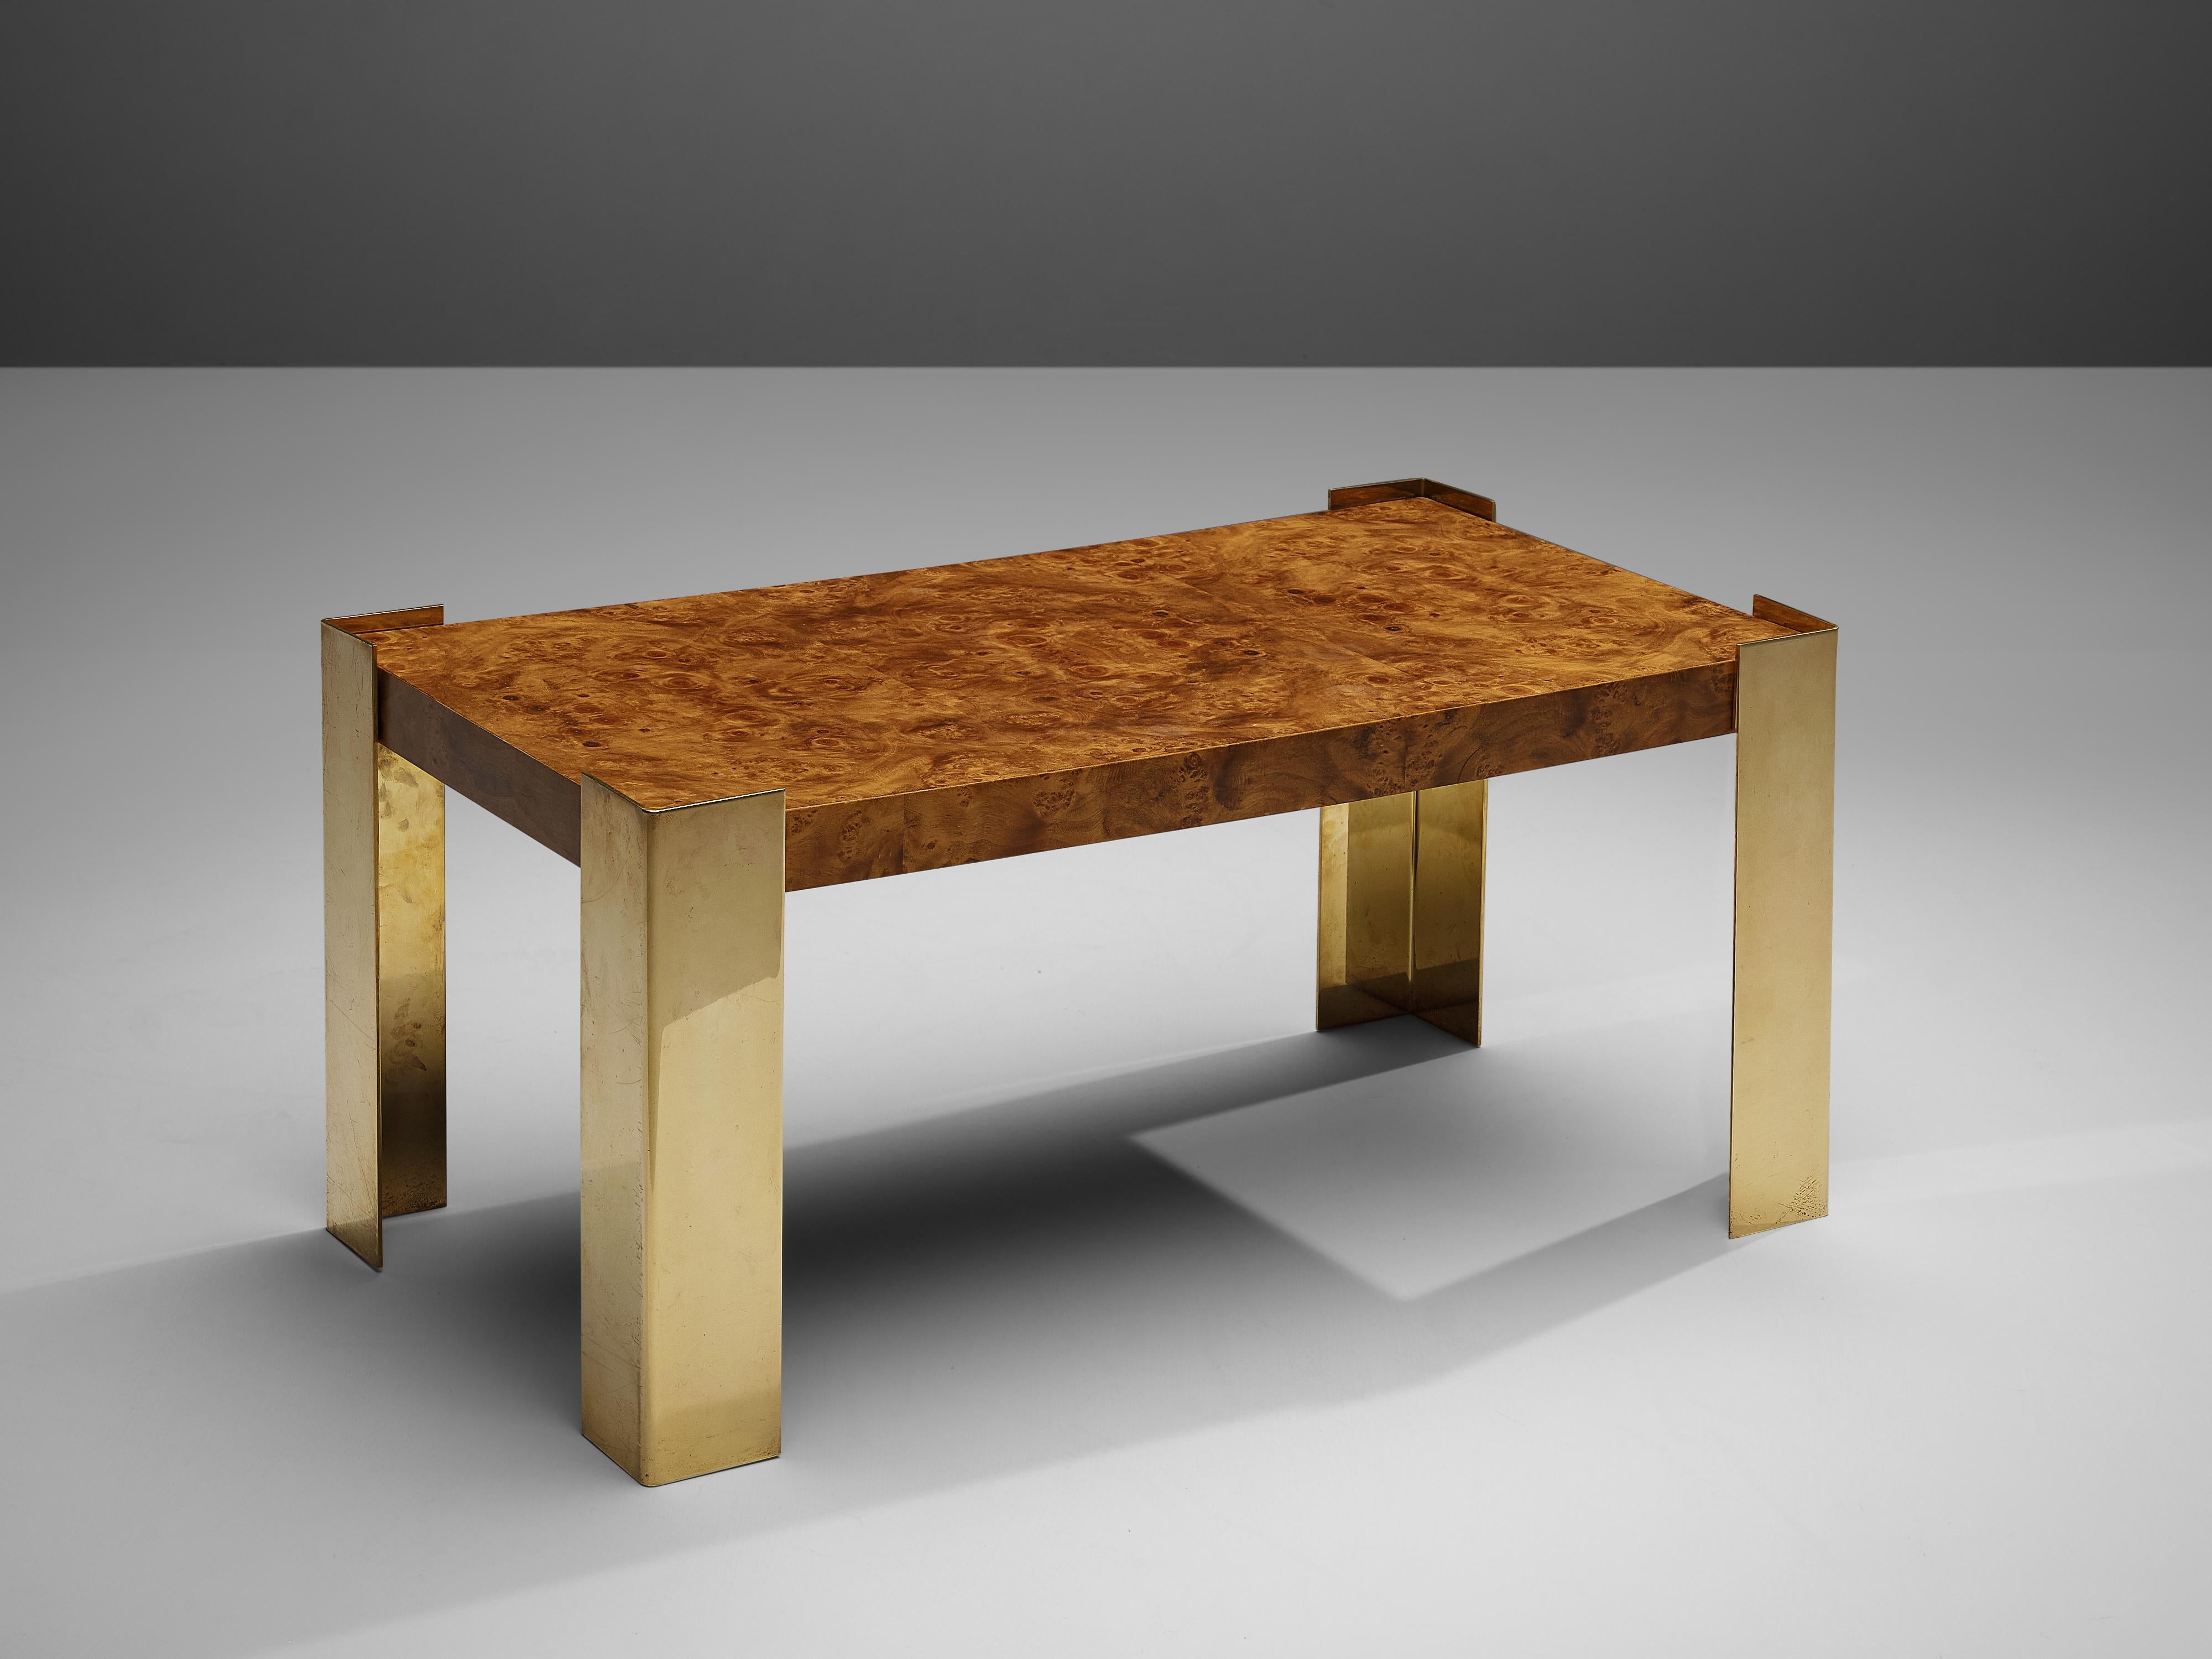 Coffee table, brass, walnut burl, Belgium, 1980s.

Belgian coffee table in glamorous look. Both the legs in brass and the vivid tabletop create an admirable design. The rectangular thick tabletop in walnut burl features a wonderful dynamic texture.